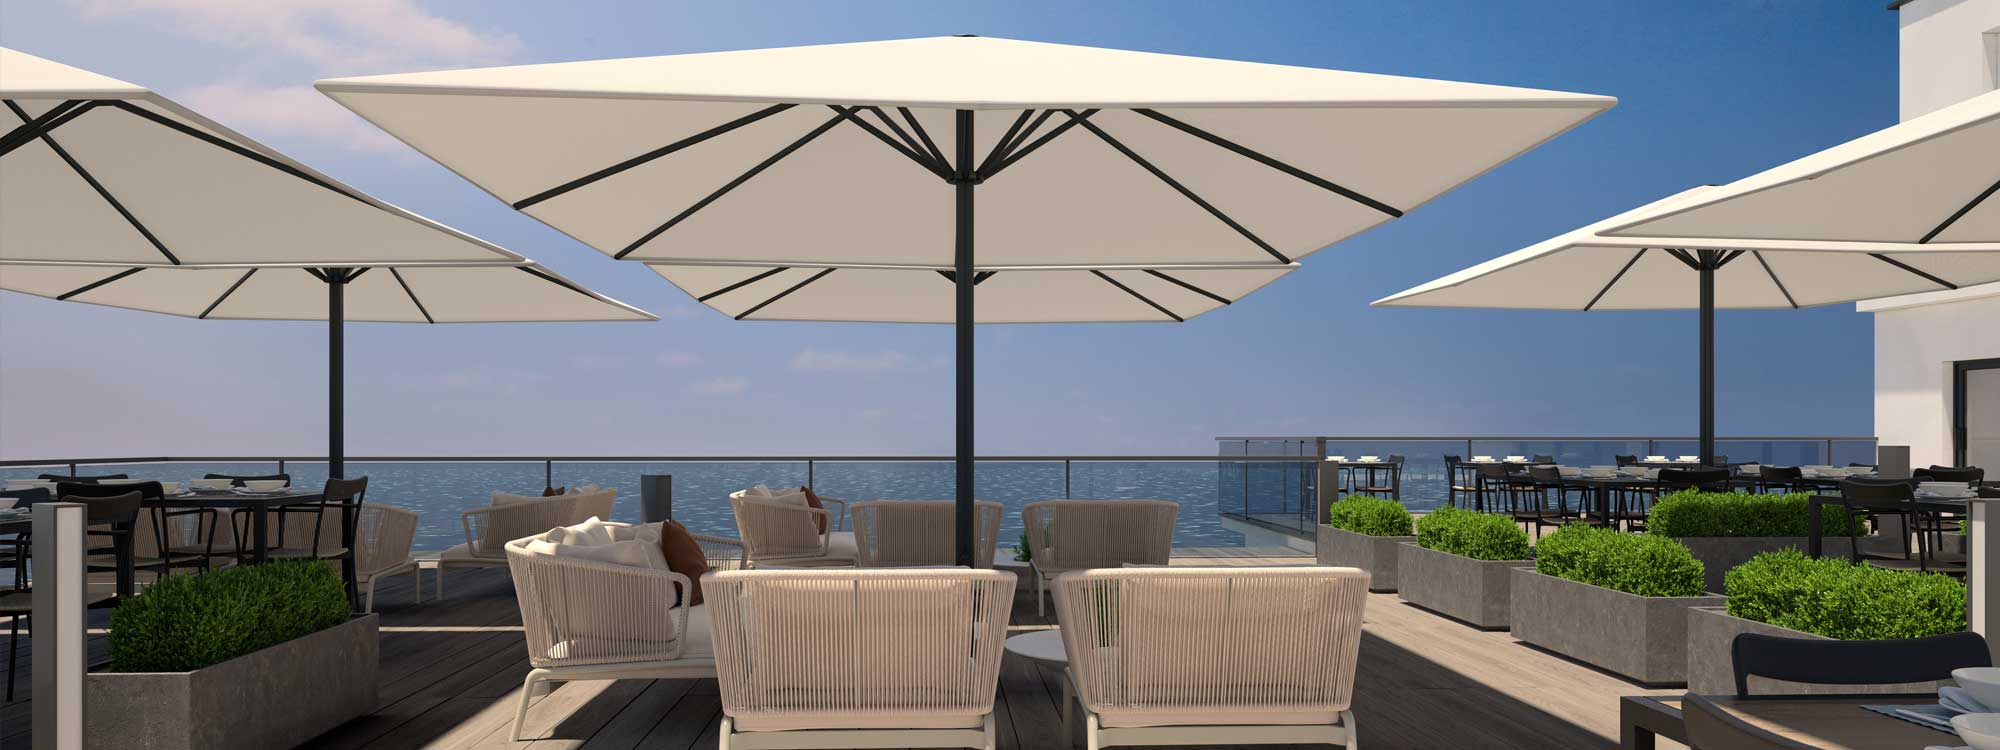 P8 square parasol is a large mast parasol & parasol with lighting in durable parasol materials by Prostor hospitality parasol company, Belgium